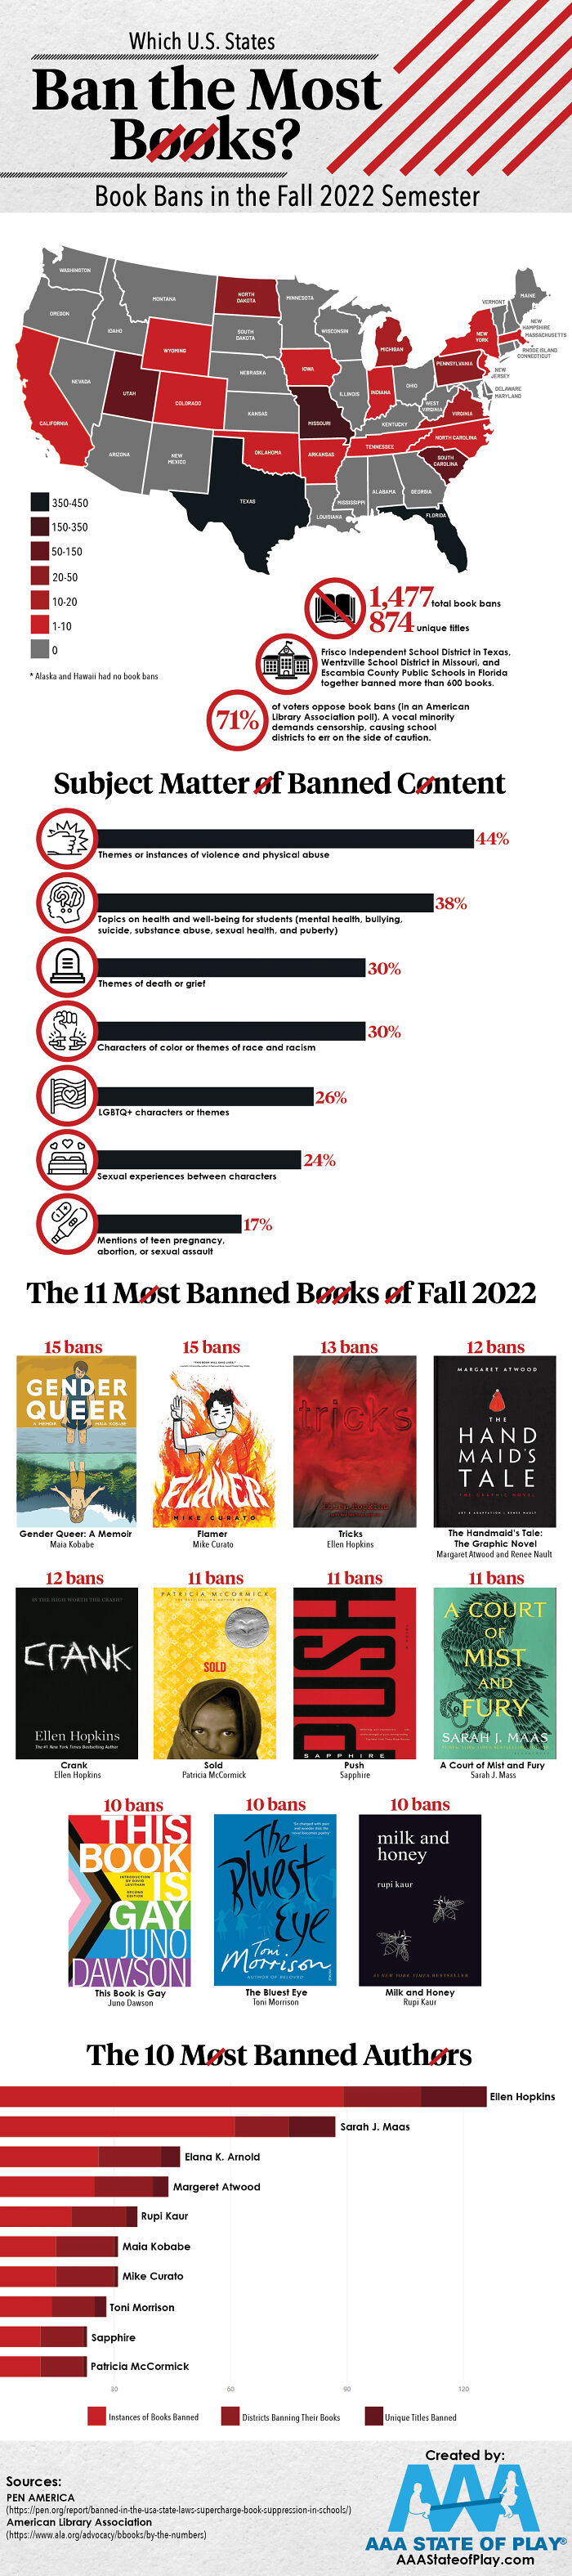 U.S. States That Have Banned The Most Books (In Autumn 2022)